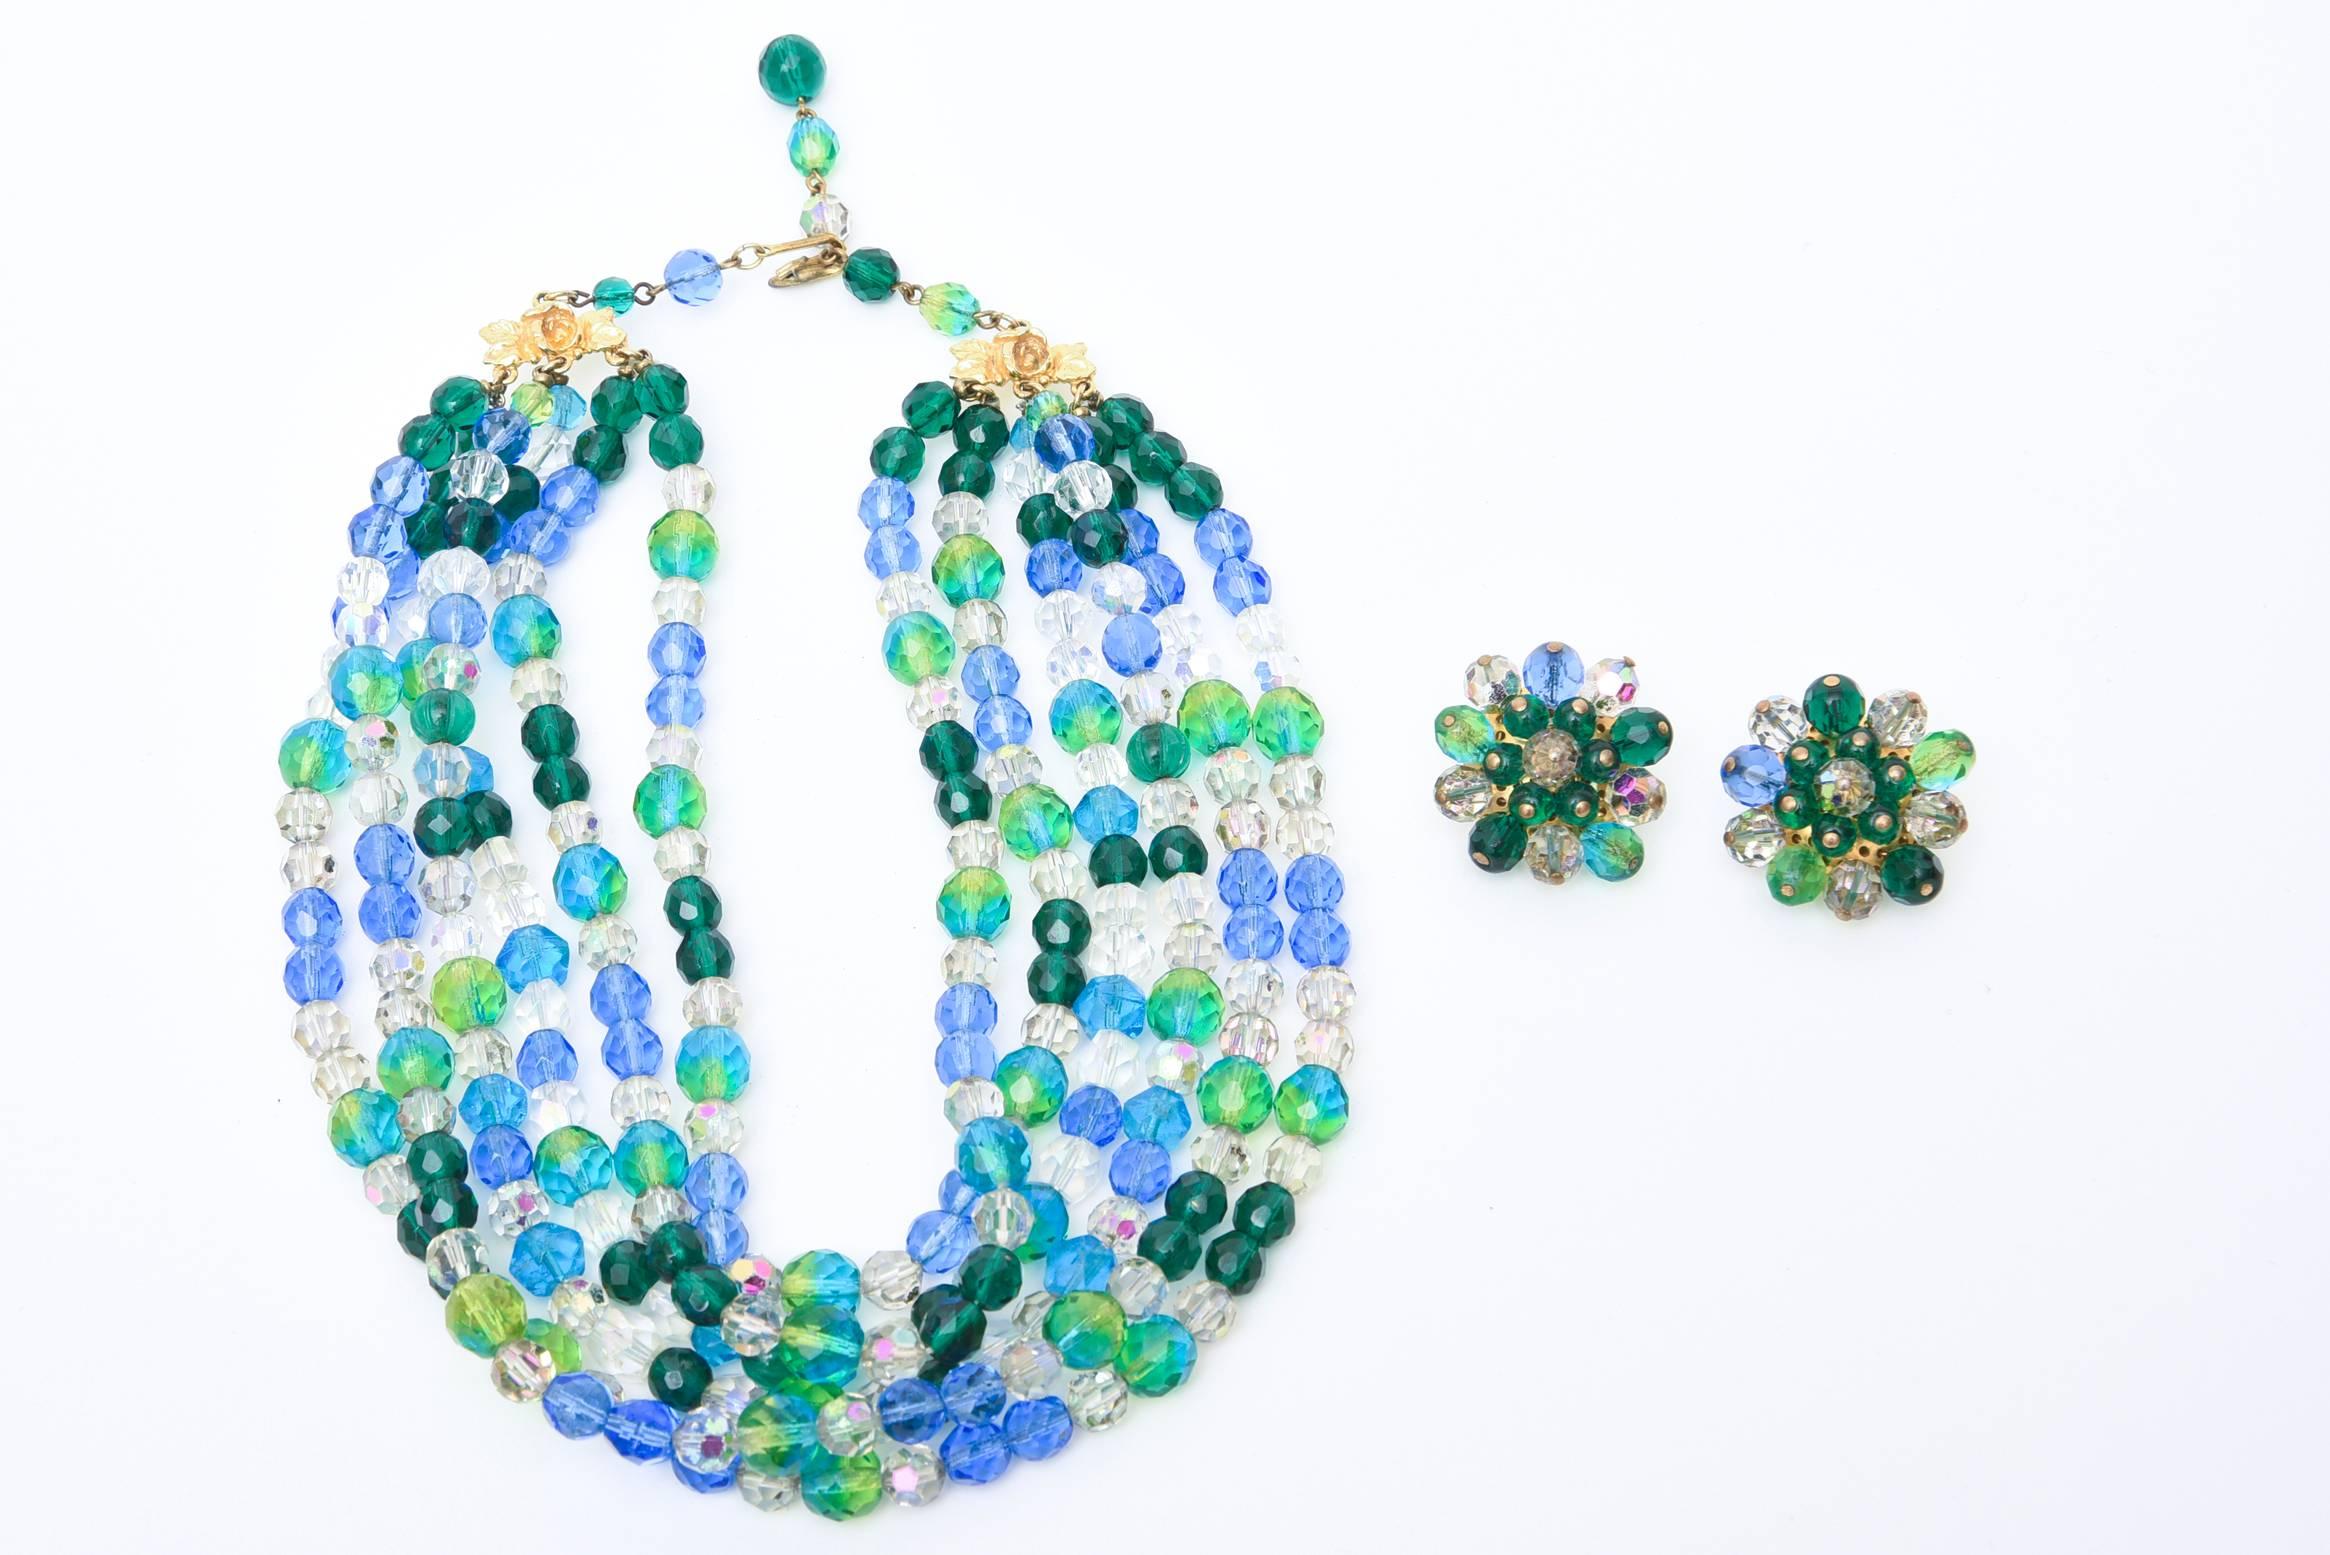 The colors of the sea in alternating glass beads of blues and greens make up this signed vintage stunning Elsa Schiaparelli necklace so wearable. There are 6 wide strands on each side of luscious colored glass beads and matching clip on cluster